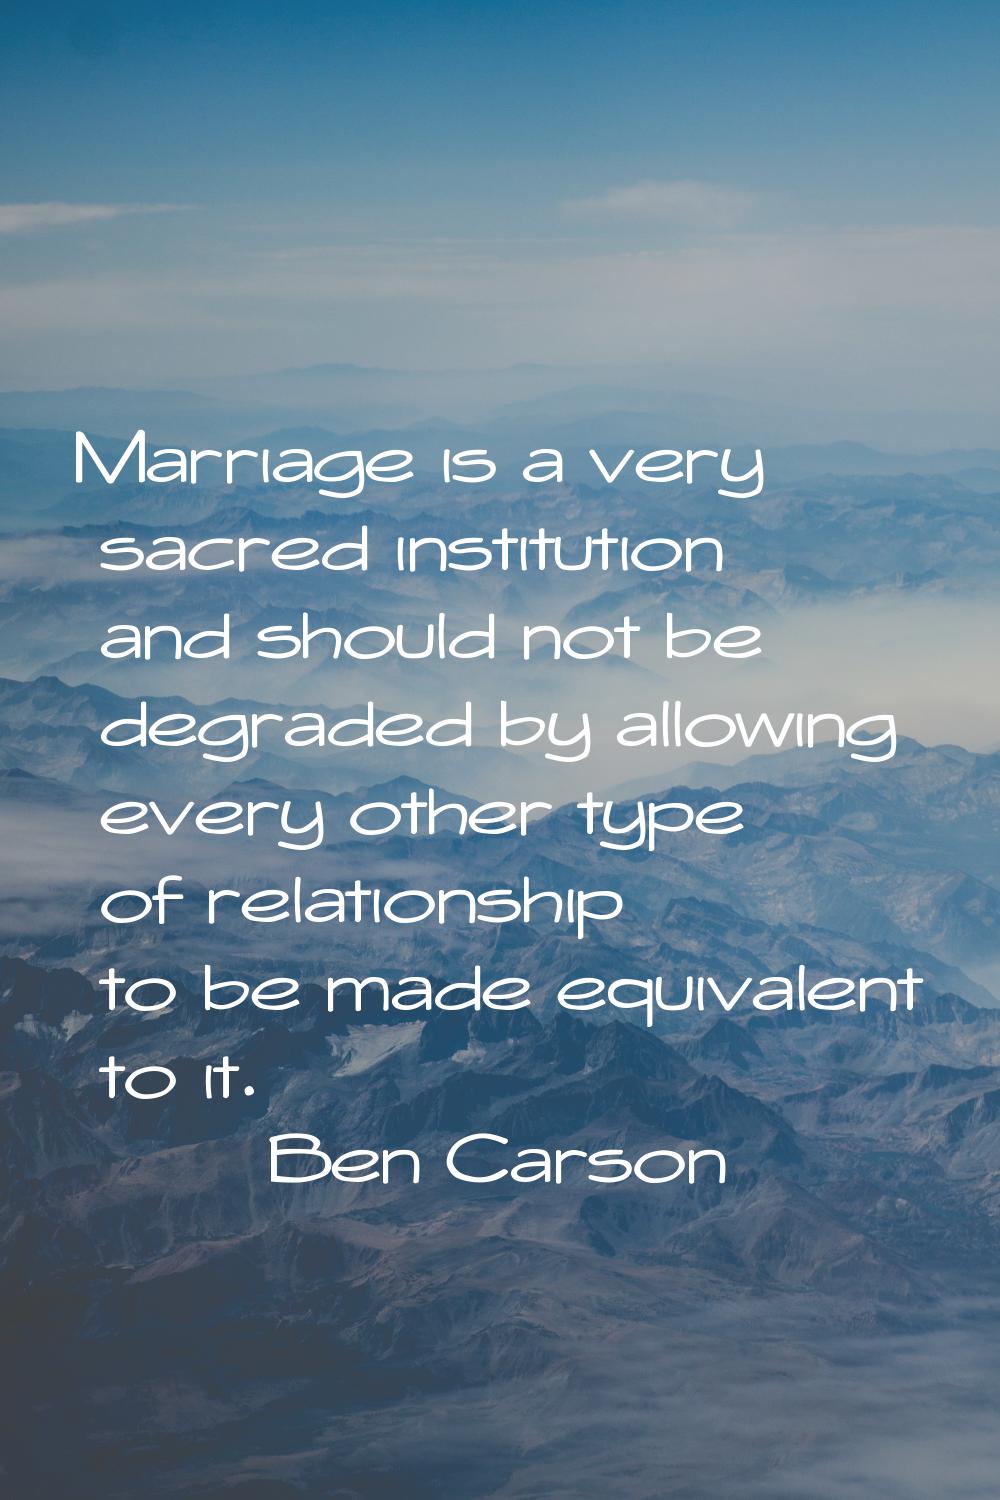 Marriage is a very sacred institution and should not be degraded by allowing every other type of re